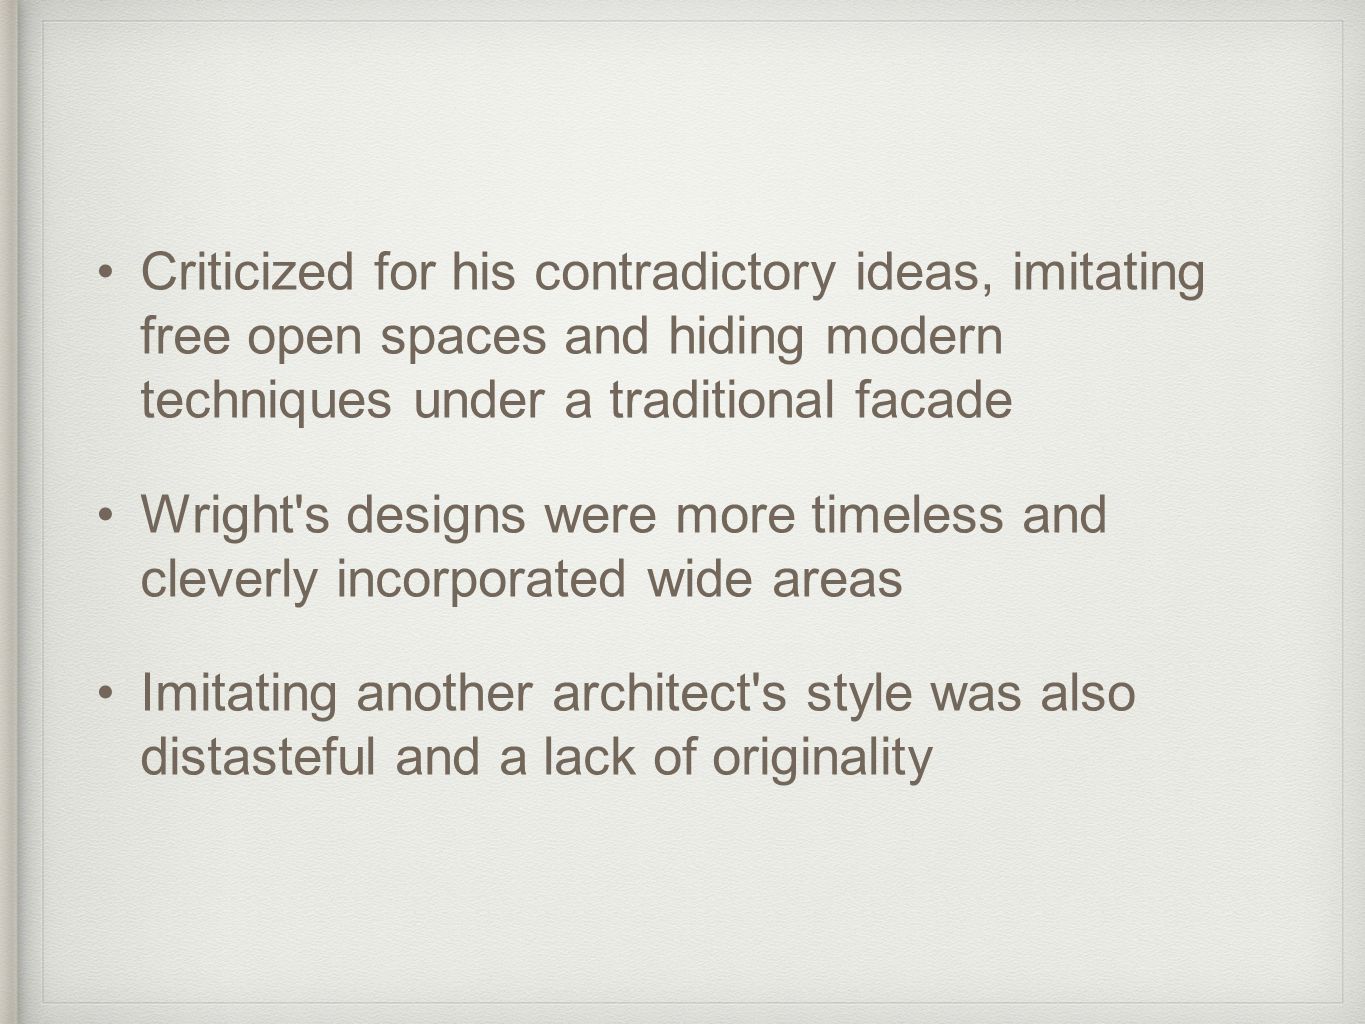 Criticized for his contradictory ideas, imitating free open spaces and hiding modern techniques under a traditional facade